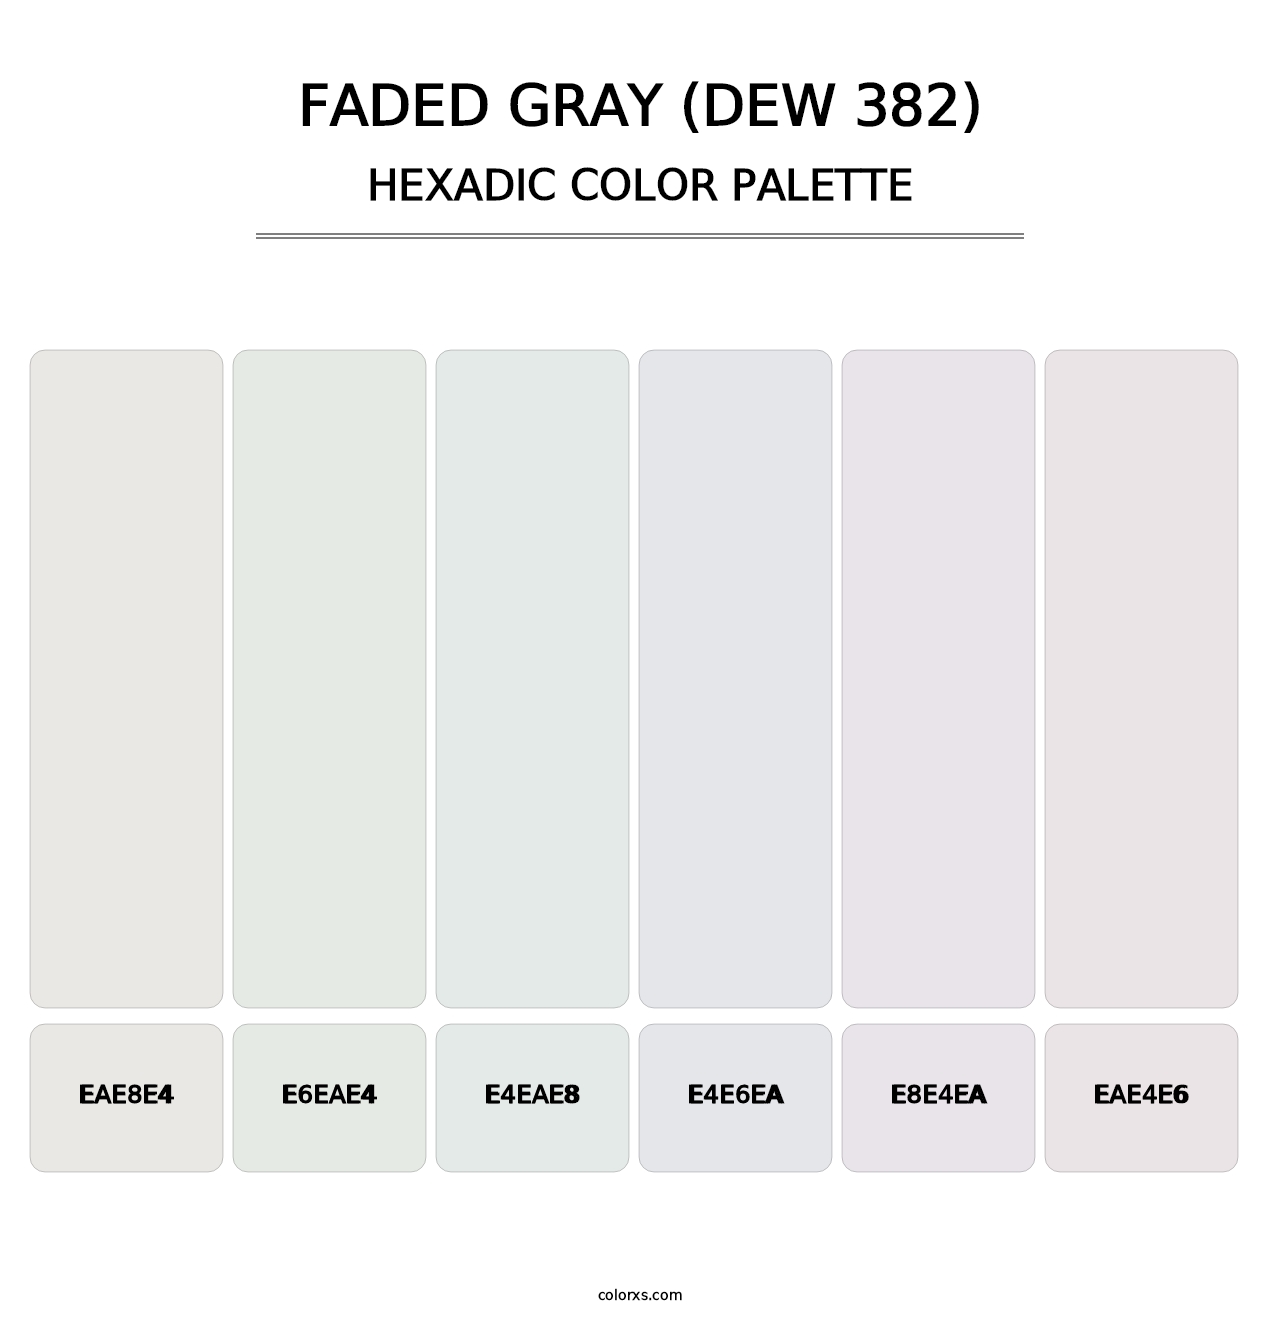 Faded Gray (DEW 382) - Hexadic Color Palette